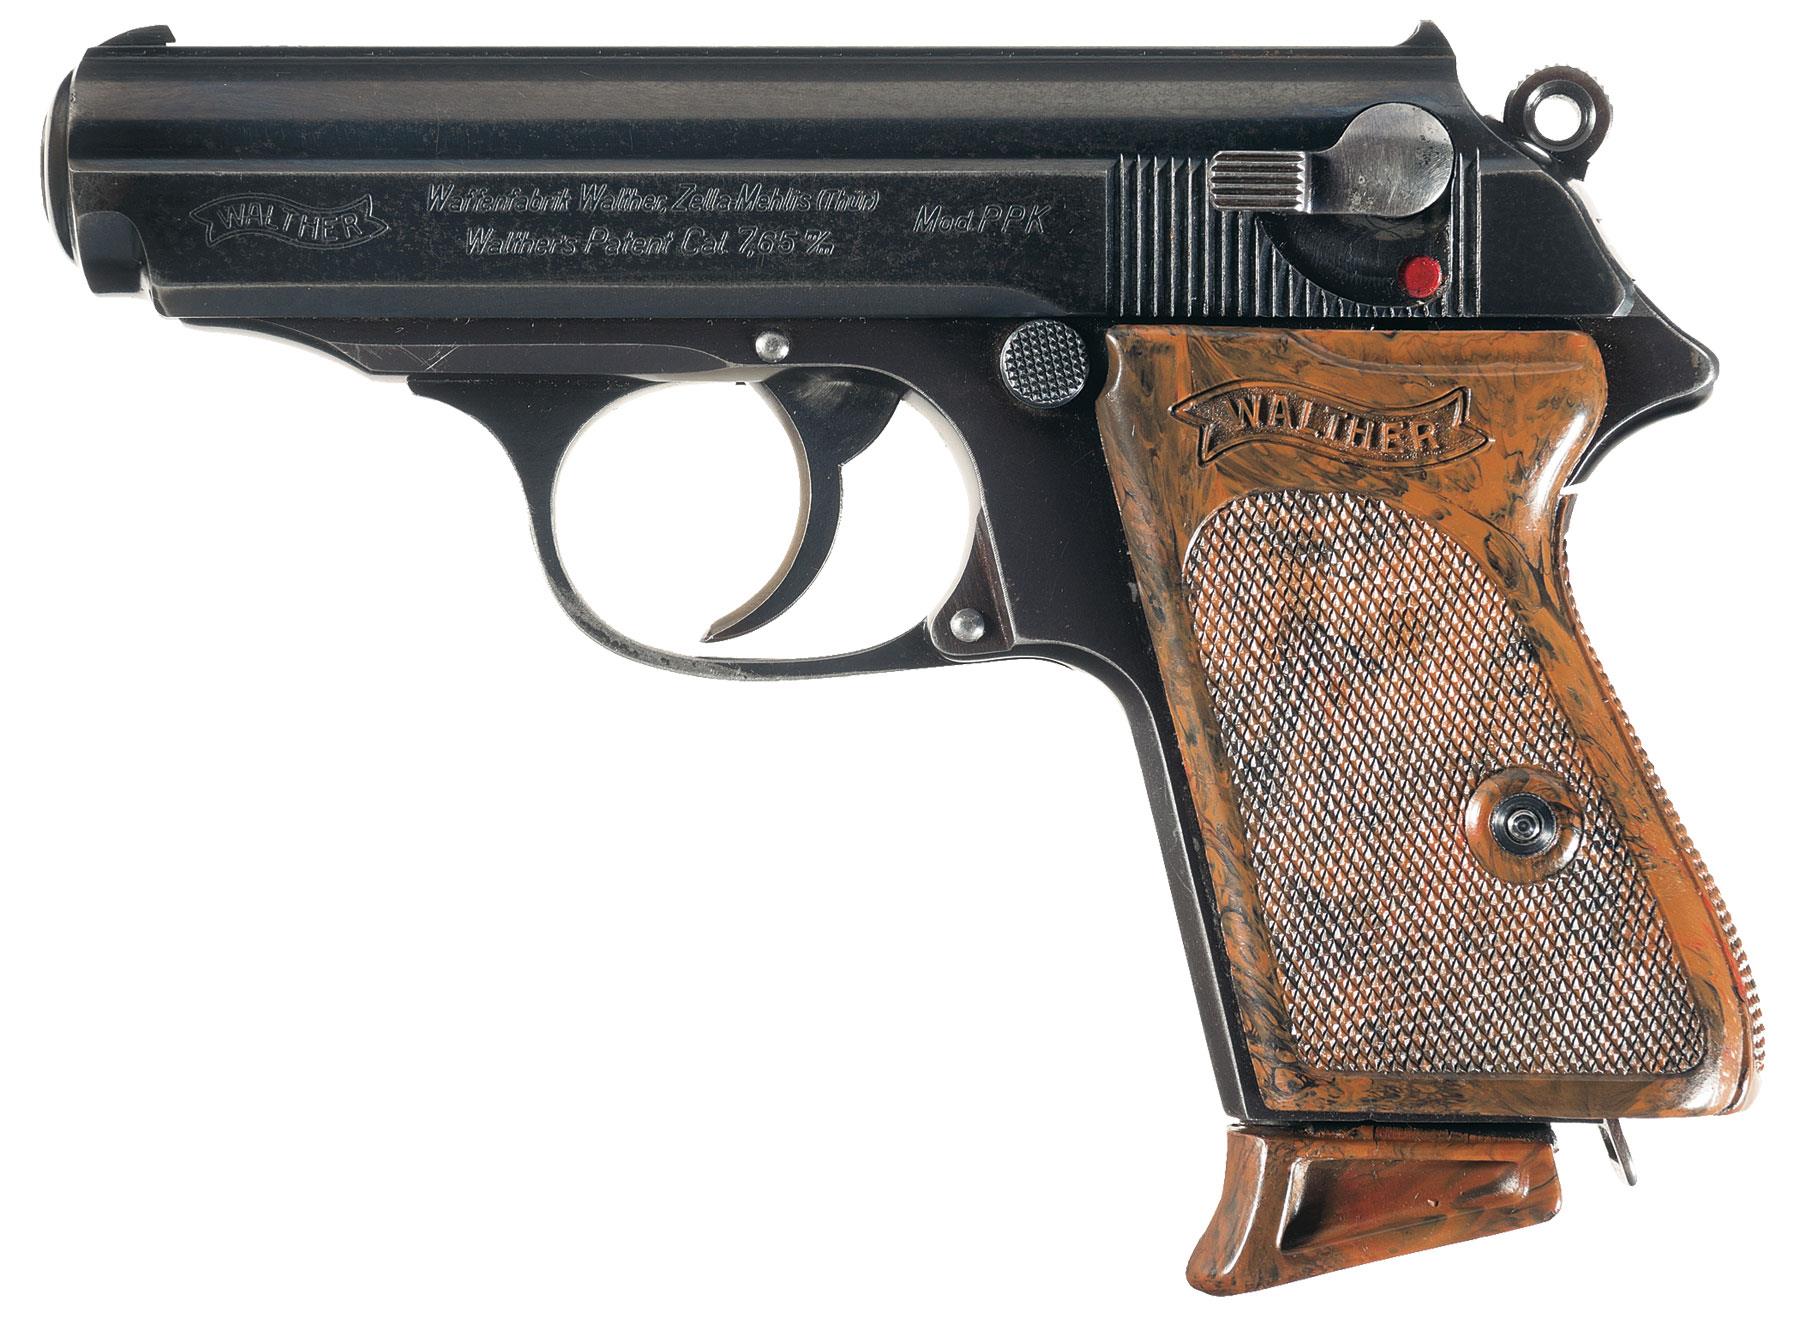 Walther ppk serial numbers list